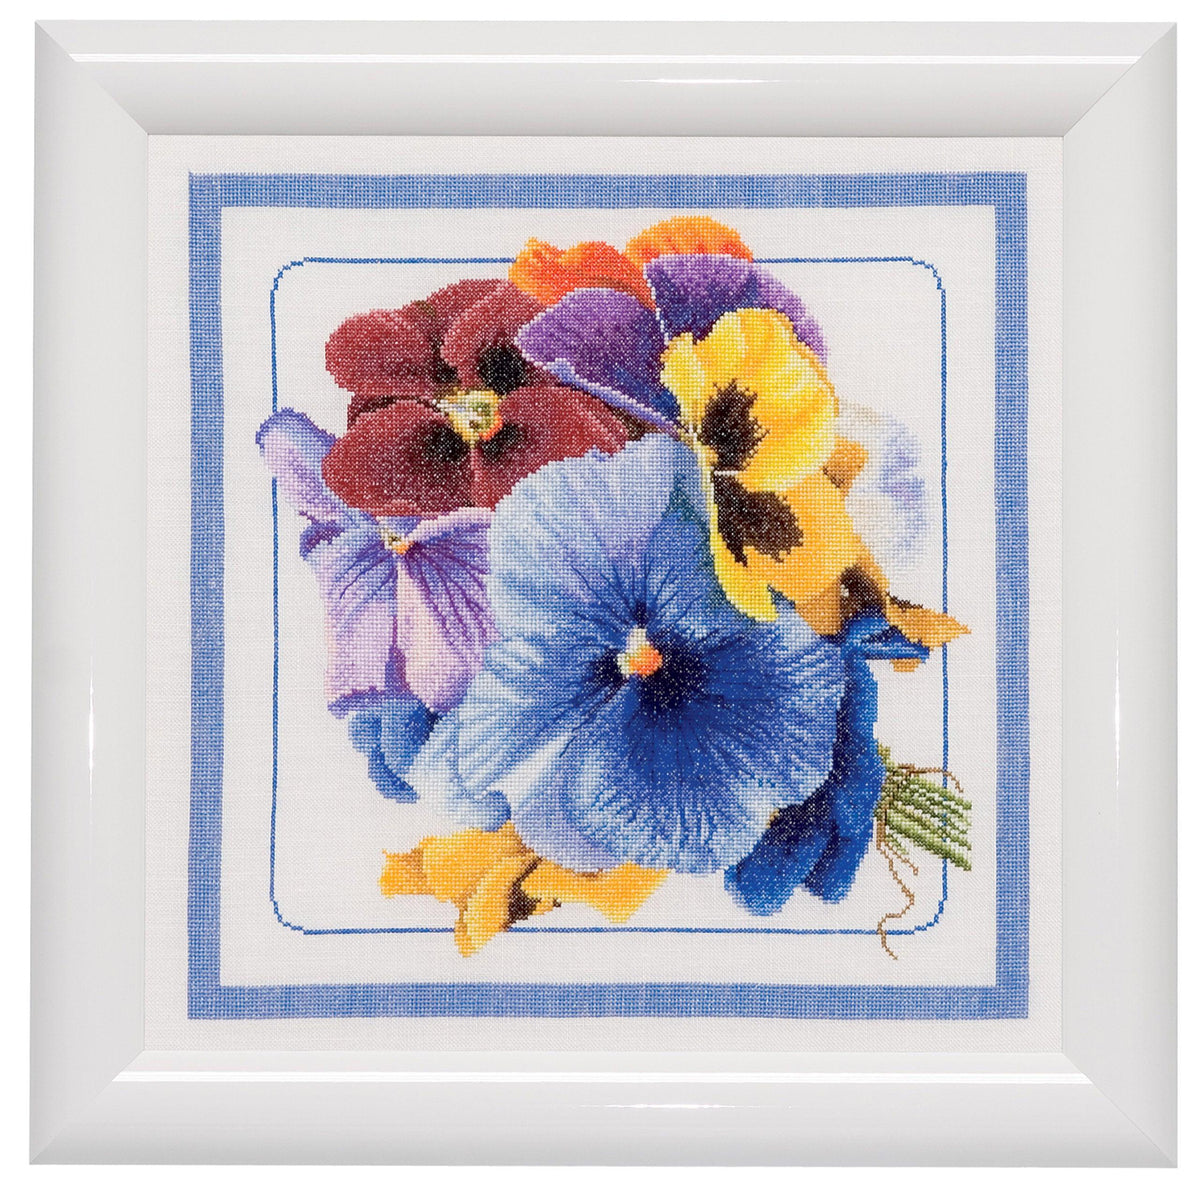 Thea Gouverneur - Counted Cross Stitch Kit - Pansies - Aida - 18 count - 435A - Thea Gouverneur Since 1959